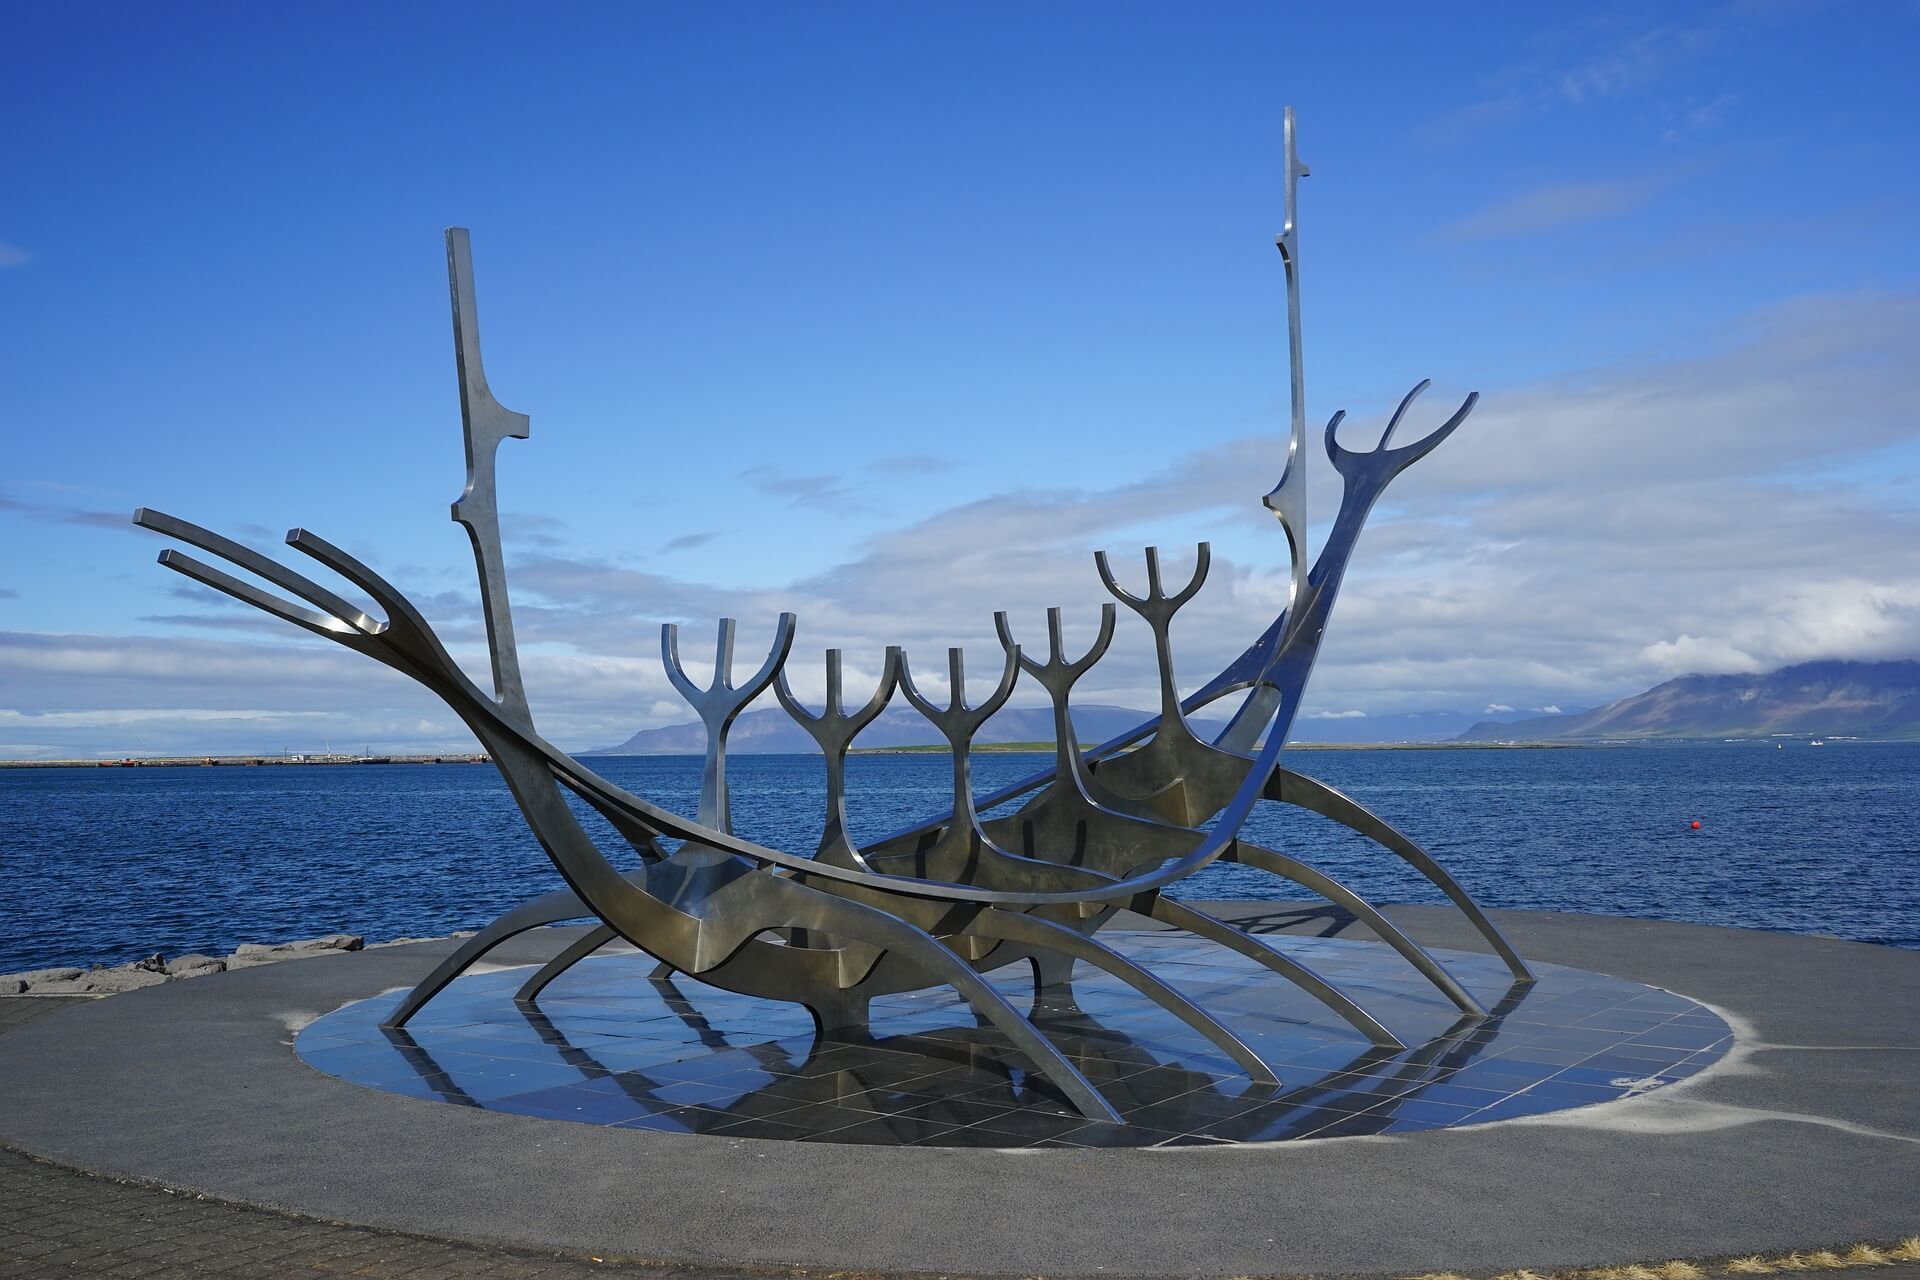 Icelandic Sculpture by the sea